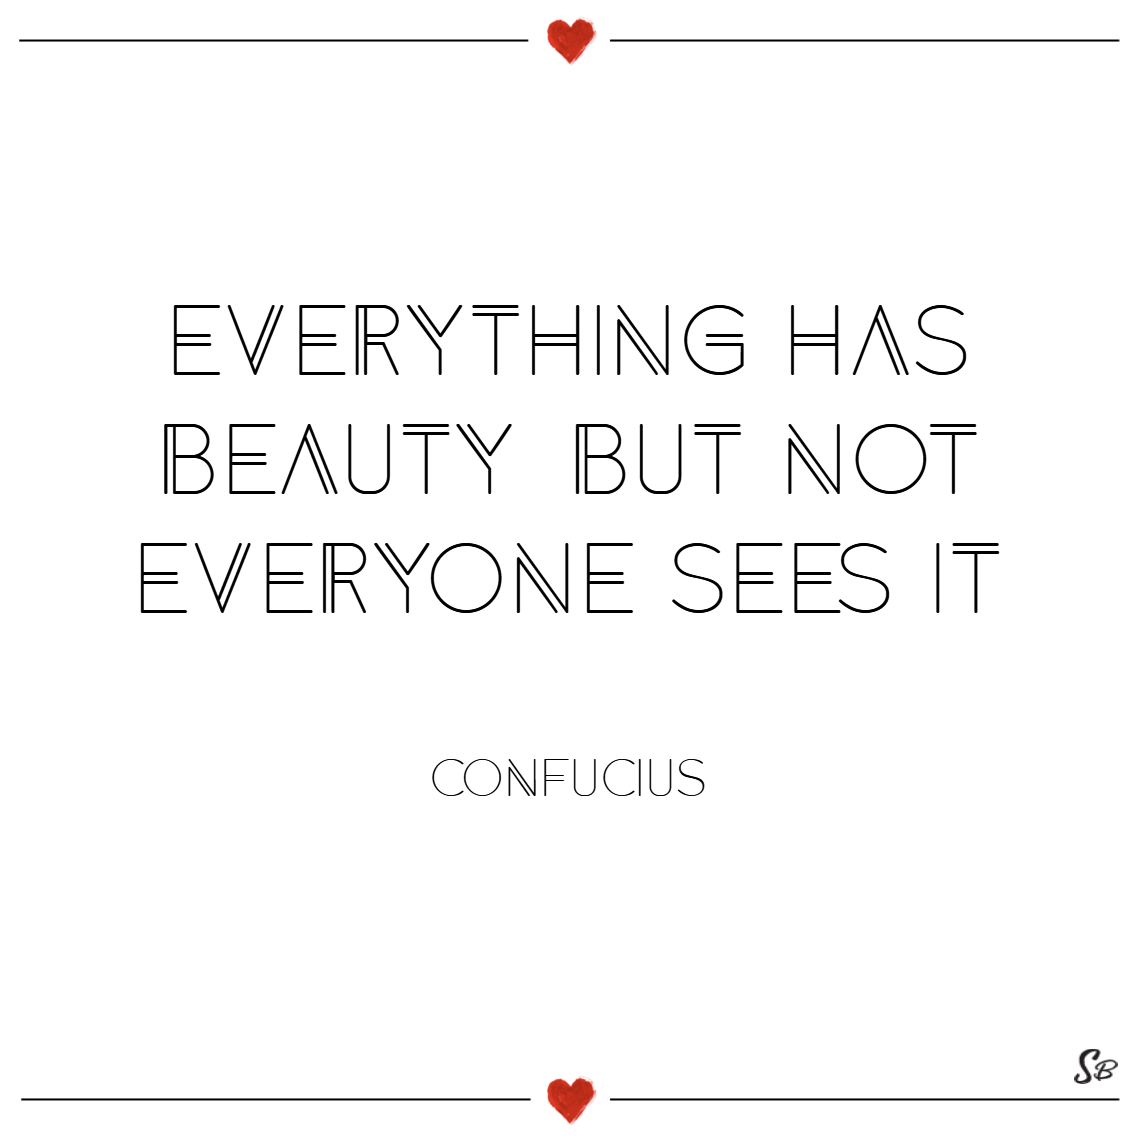 85 Most Beautiful Beauty Quotes & Sayings